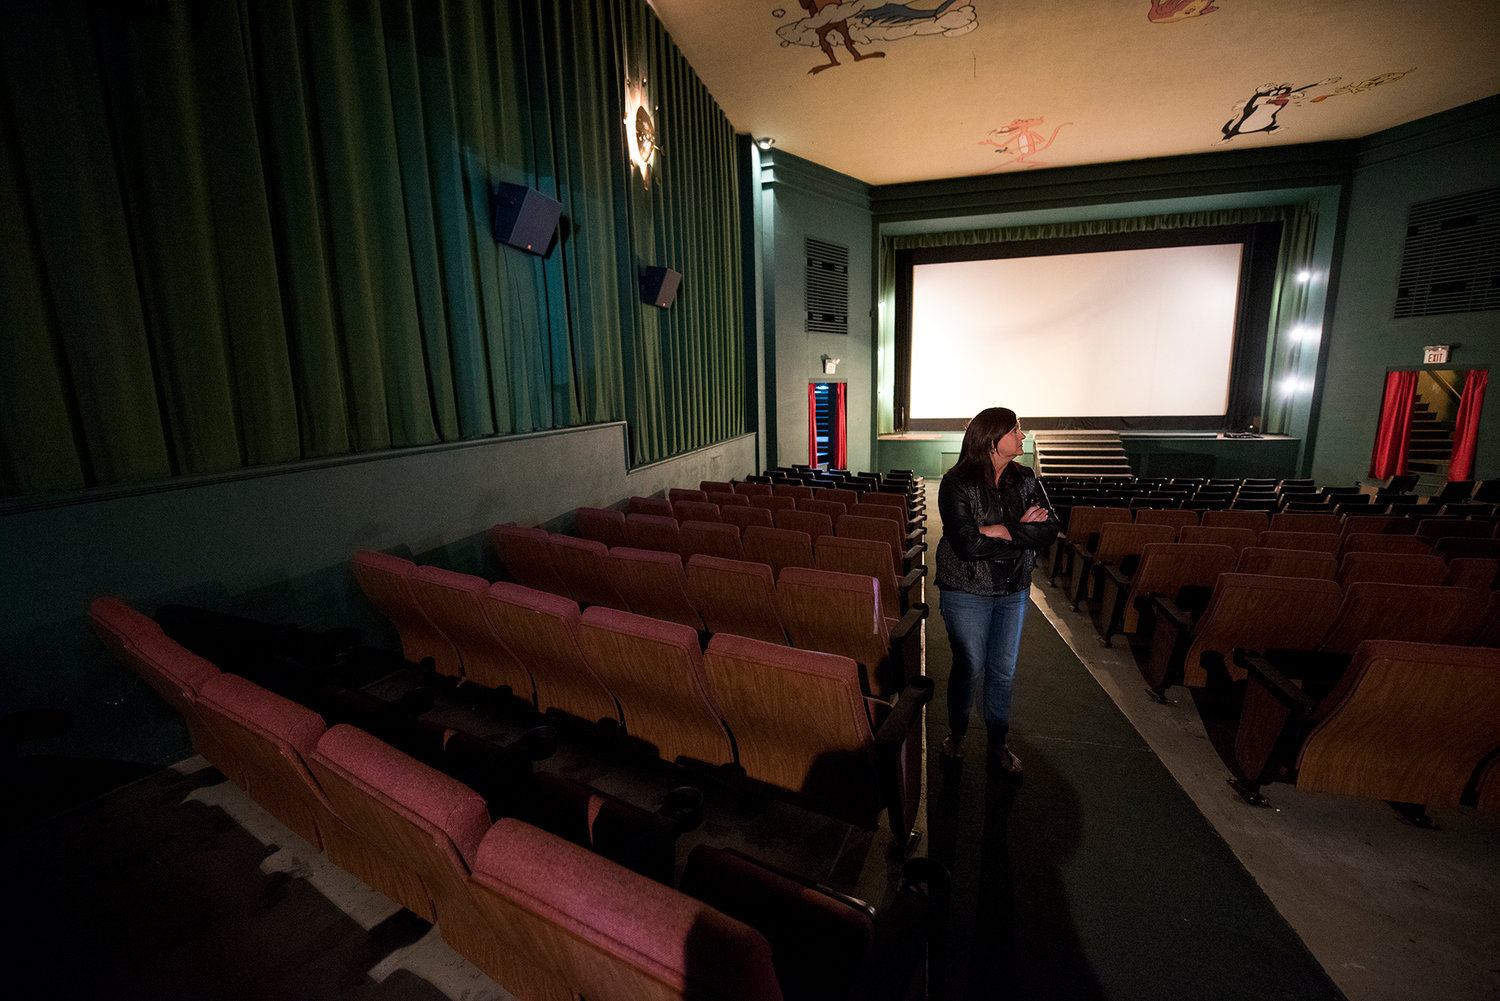 In this May 24 file photo, Debbie Hamilton, who will run the Chehalis Theater, walks up the aisle at theater on in downtown Chehalis. The theater had its soft opening last weekend.